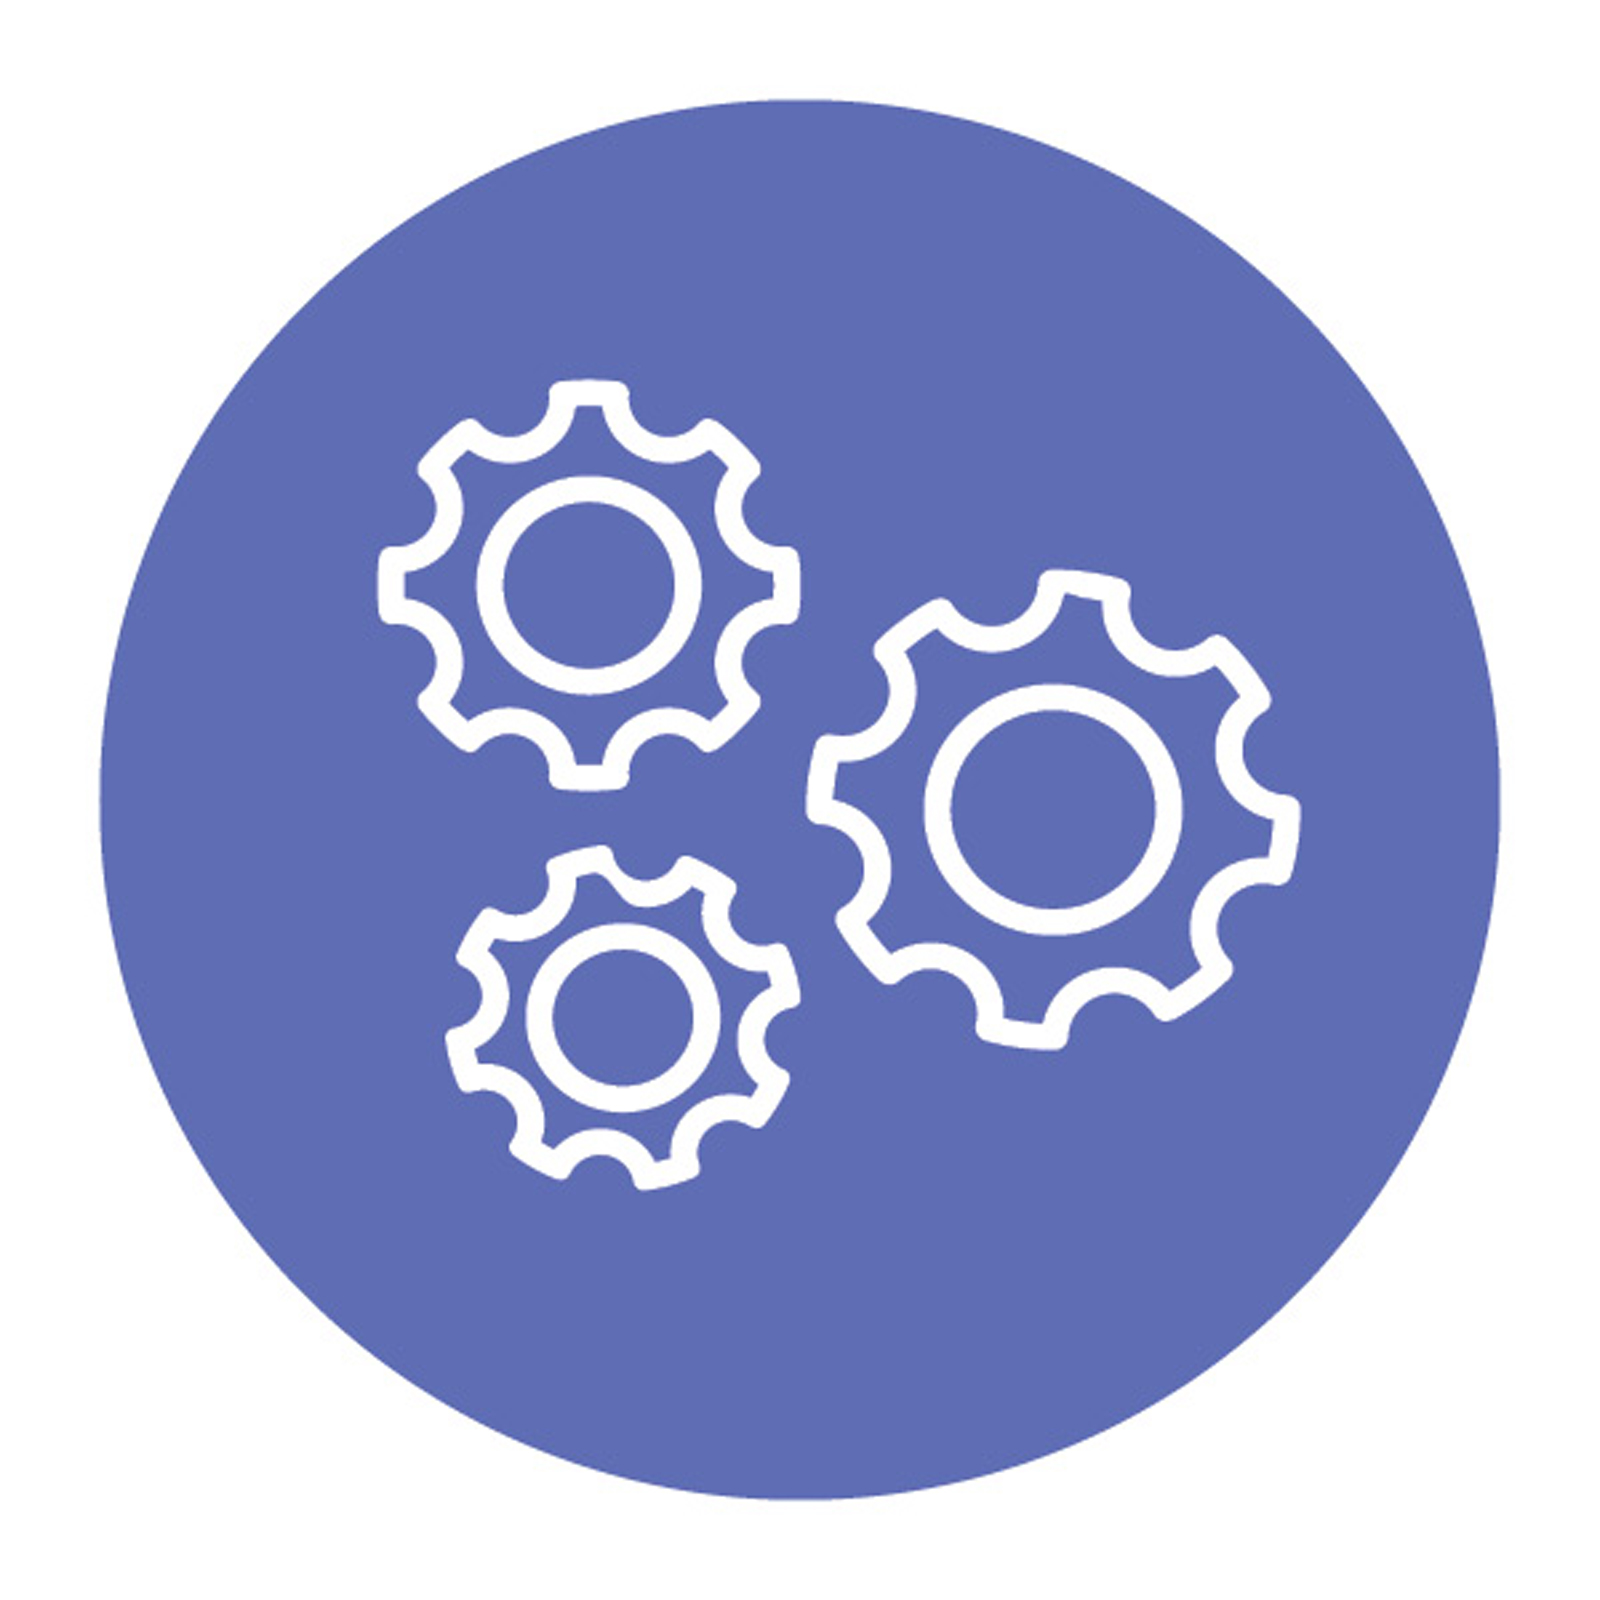 A purple circle with 3 gears in the center